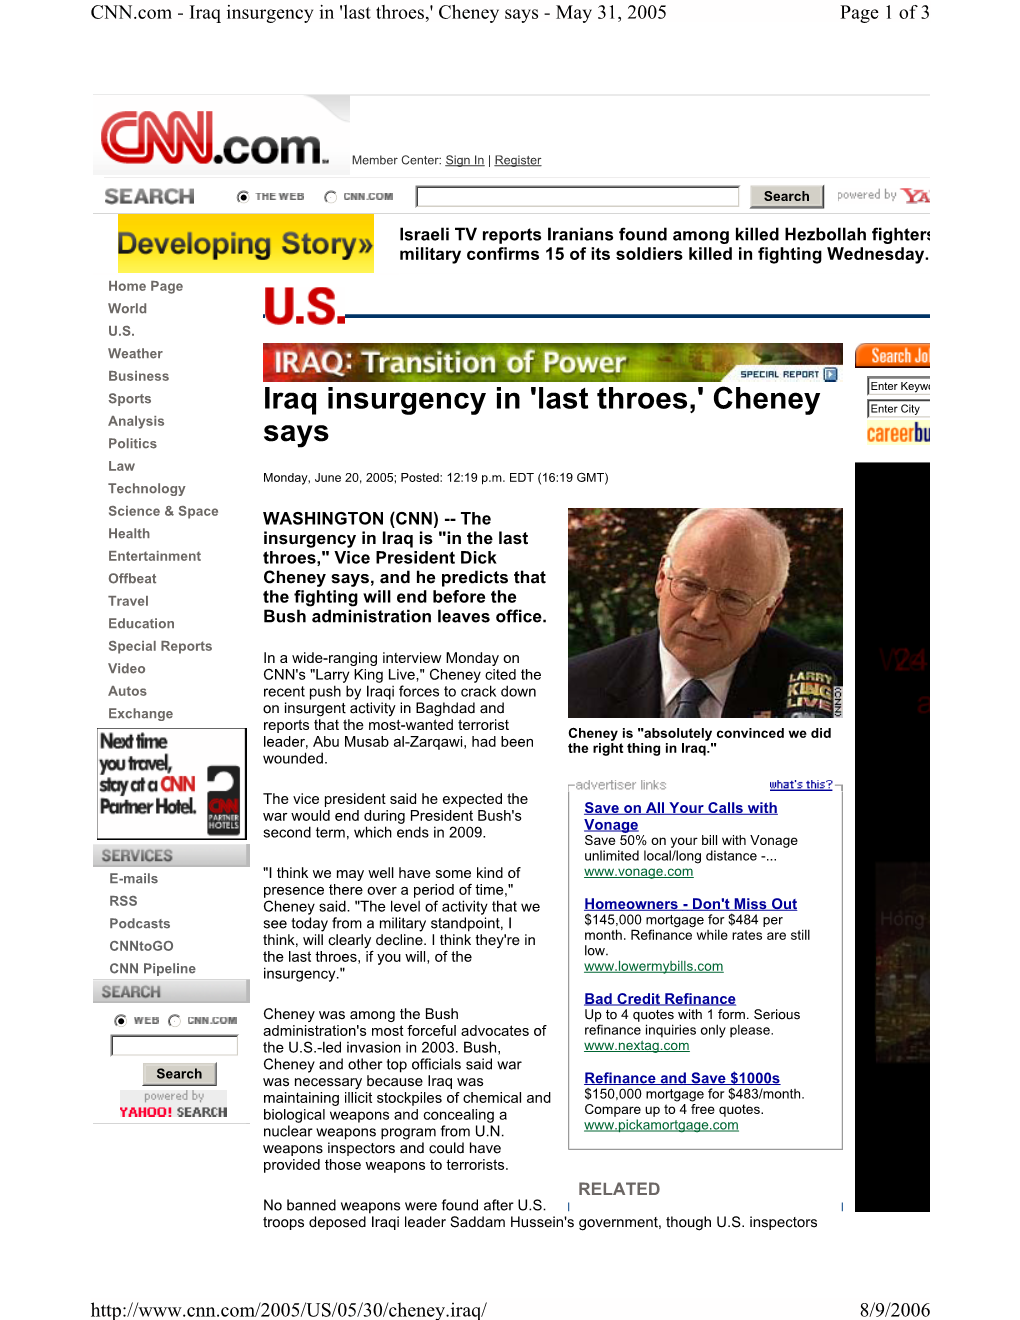 Iraq Insurgency in 'Last Throes,' Cheney Says - May 31, 2005 Page 1 of 3